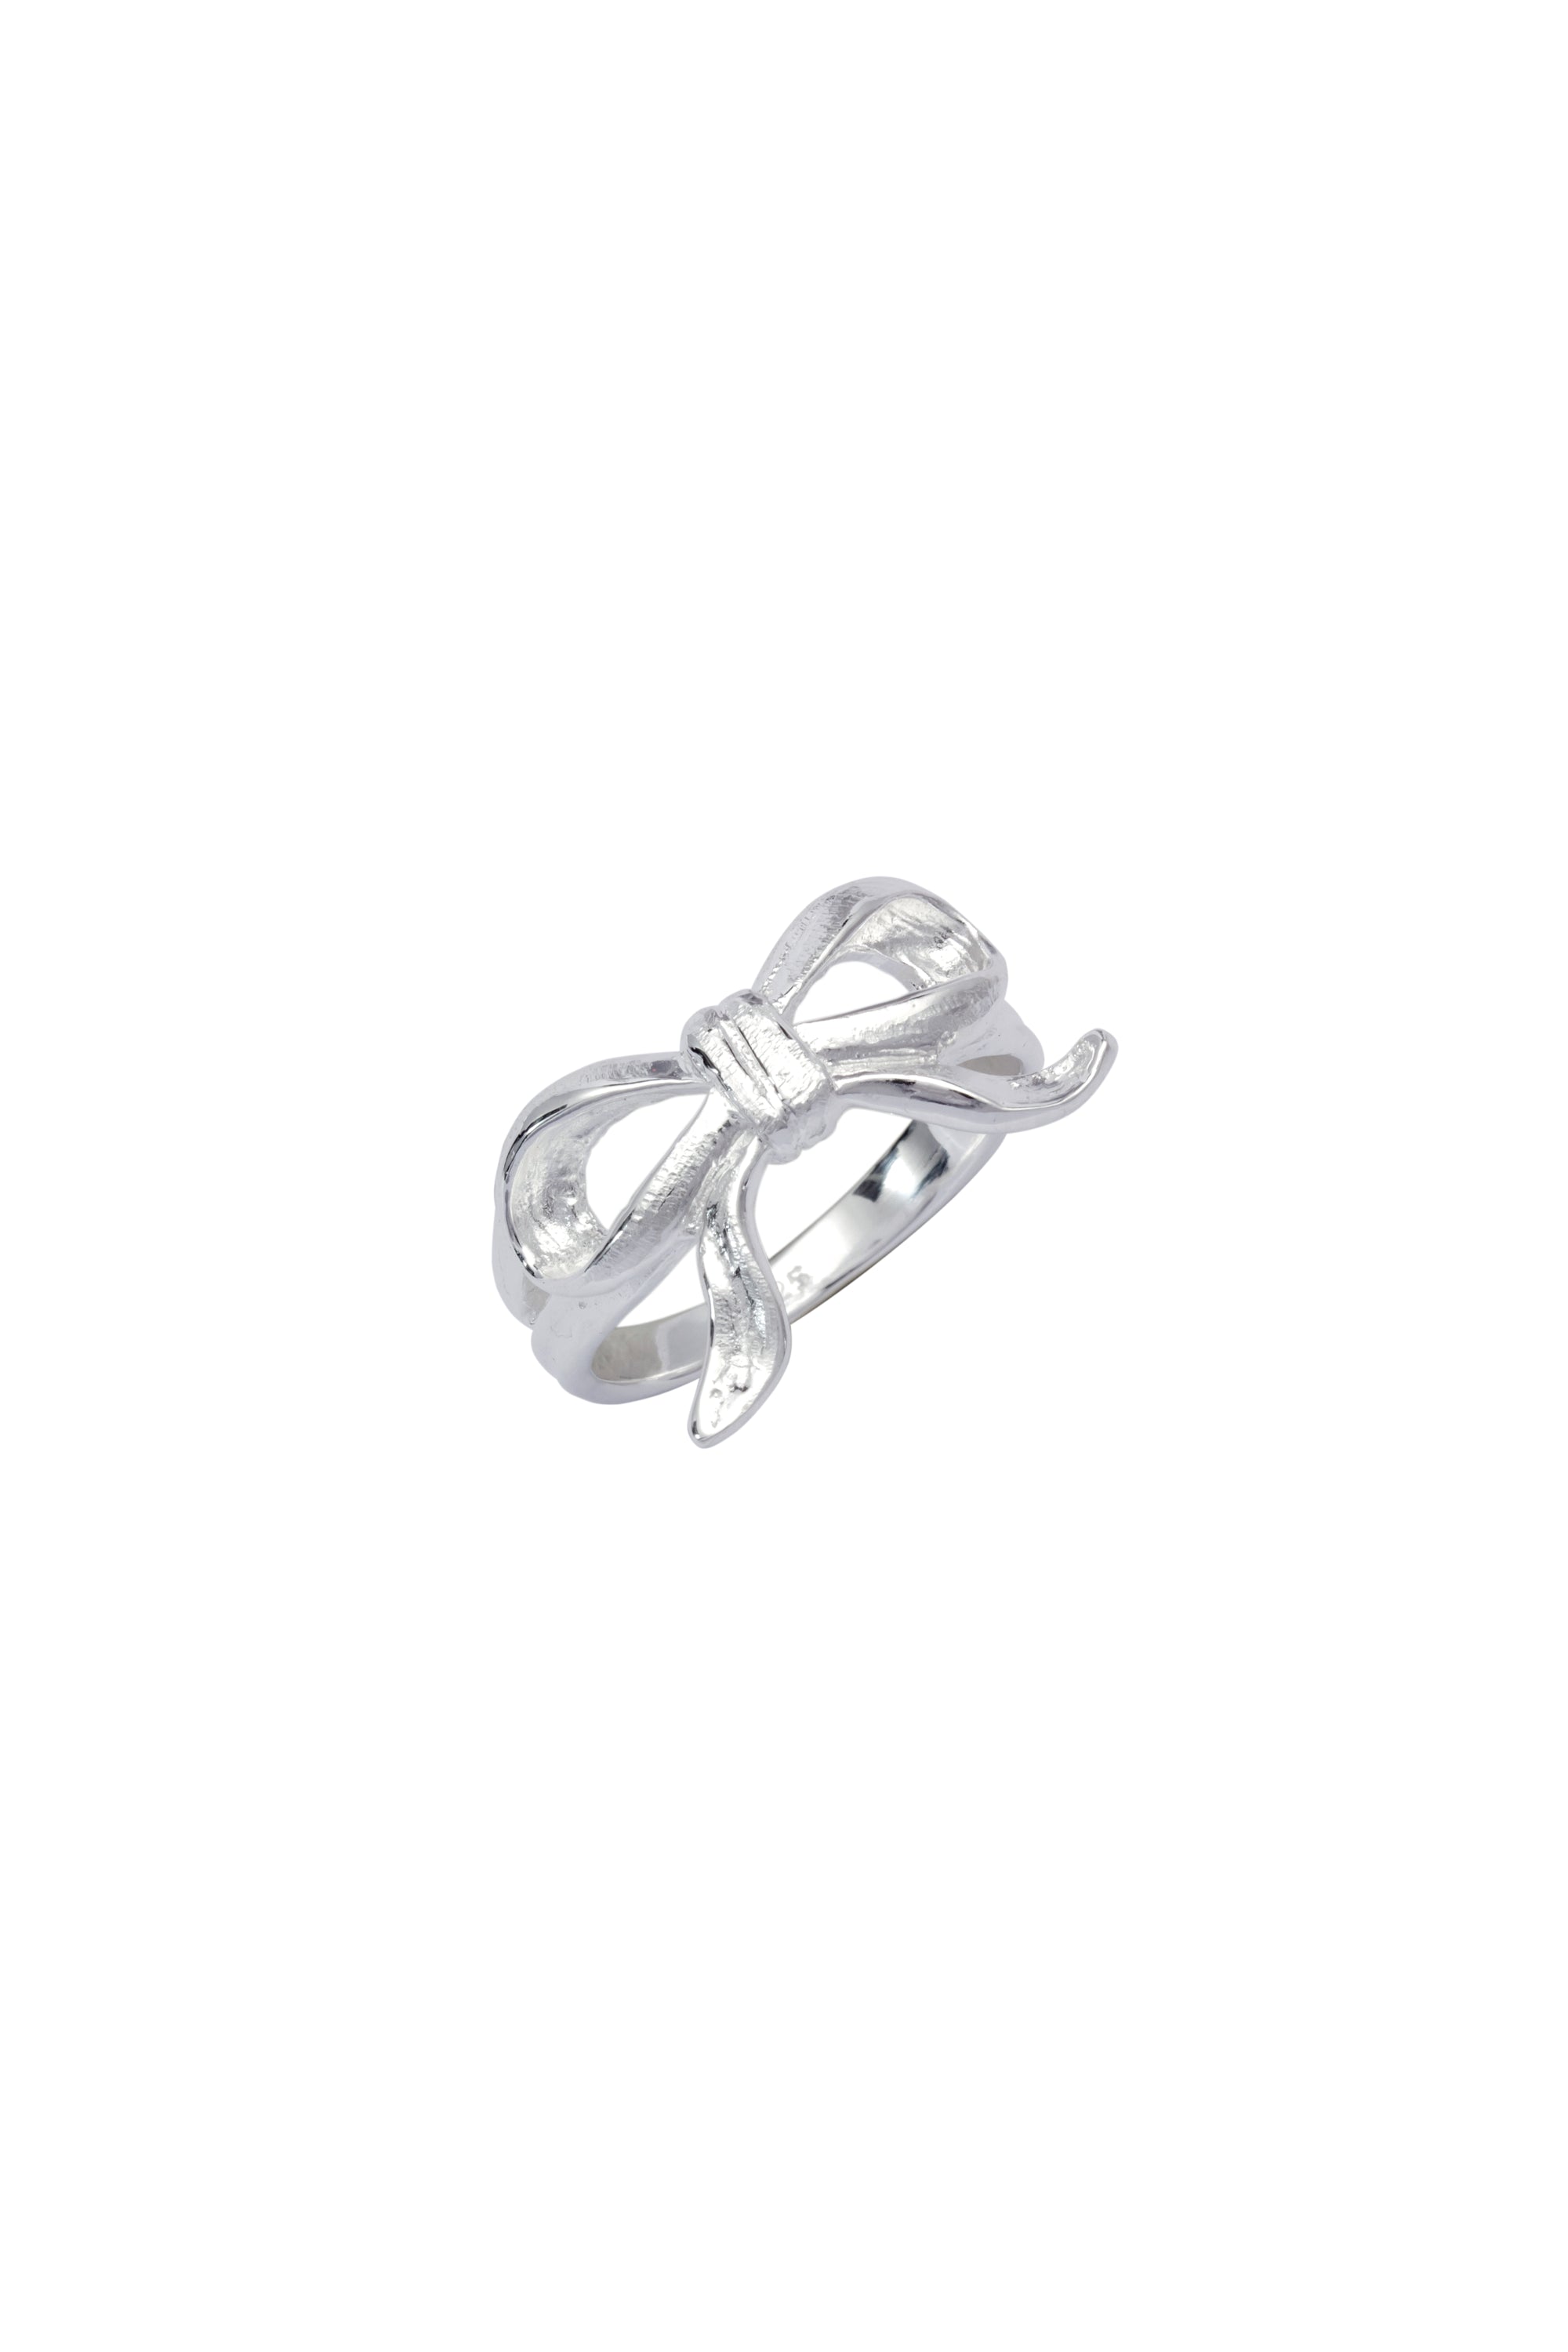 BOW PEEP RING SILVER